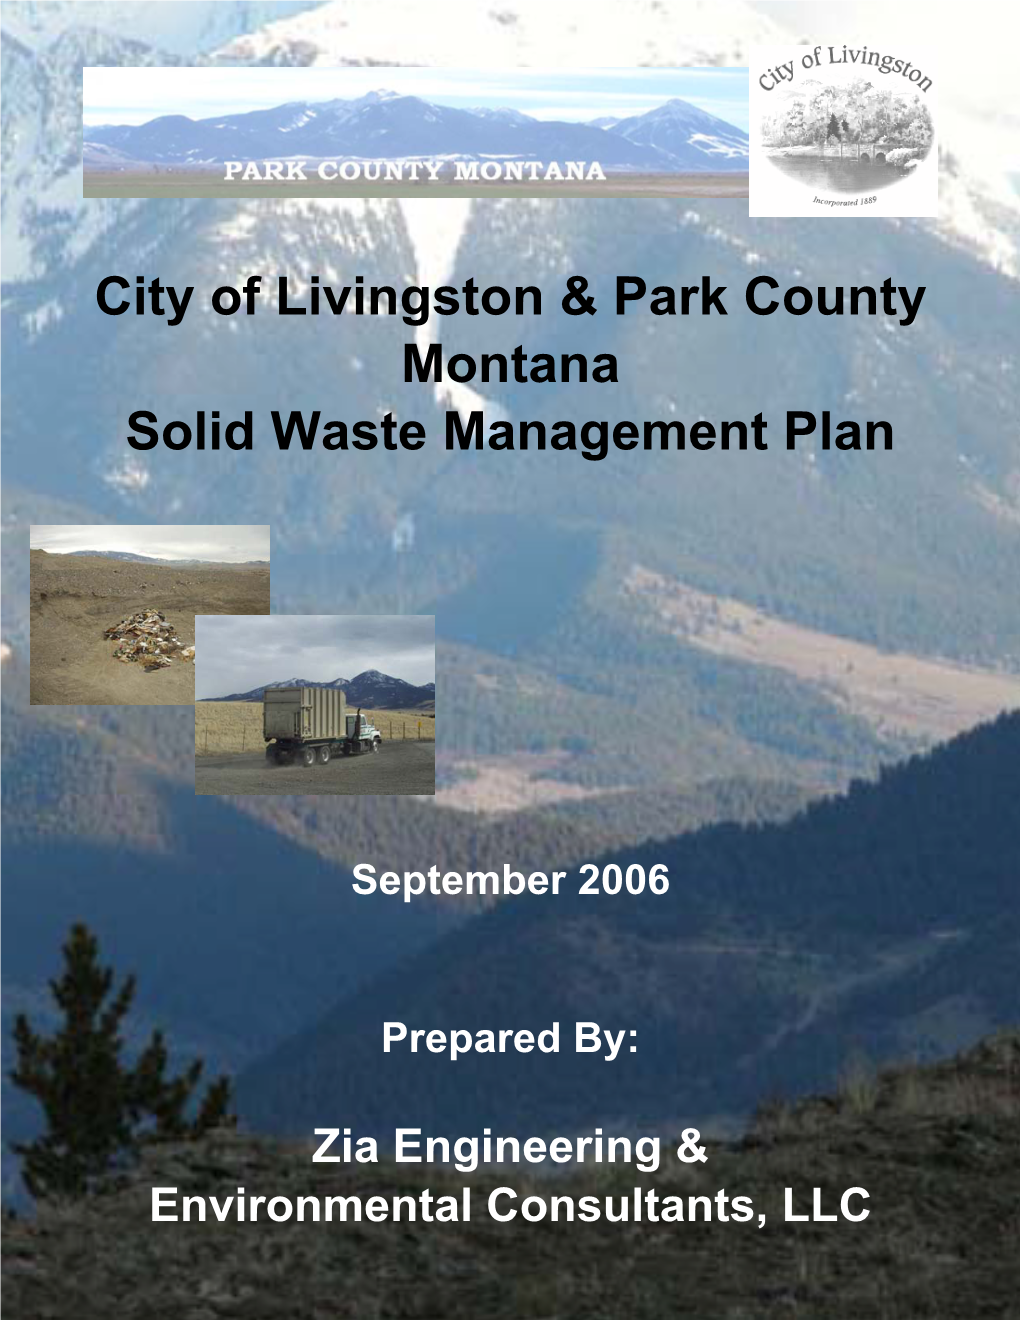 City of Livingston & Park County Montana Solid Waste Management